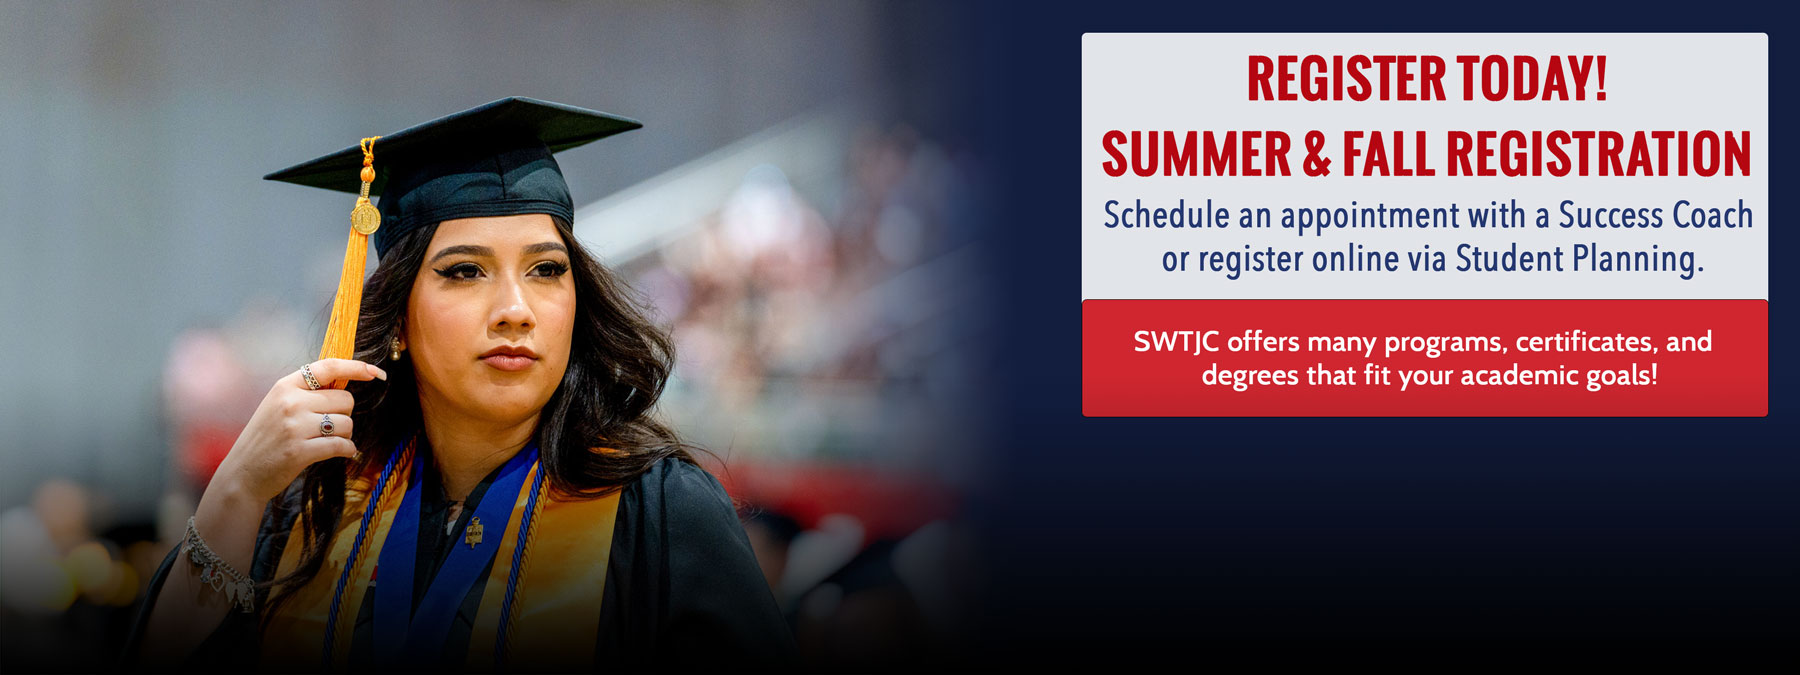 SWTJC graduate photographed at Commencement Ceremony 2023. Informative text: Register Today! Summer & Fall Registration. Schedule an appointment with a Success Coach or register online via Student Planning. SWTJC offers many programs, certificates, and degrees that fit your academic goals.